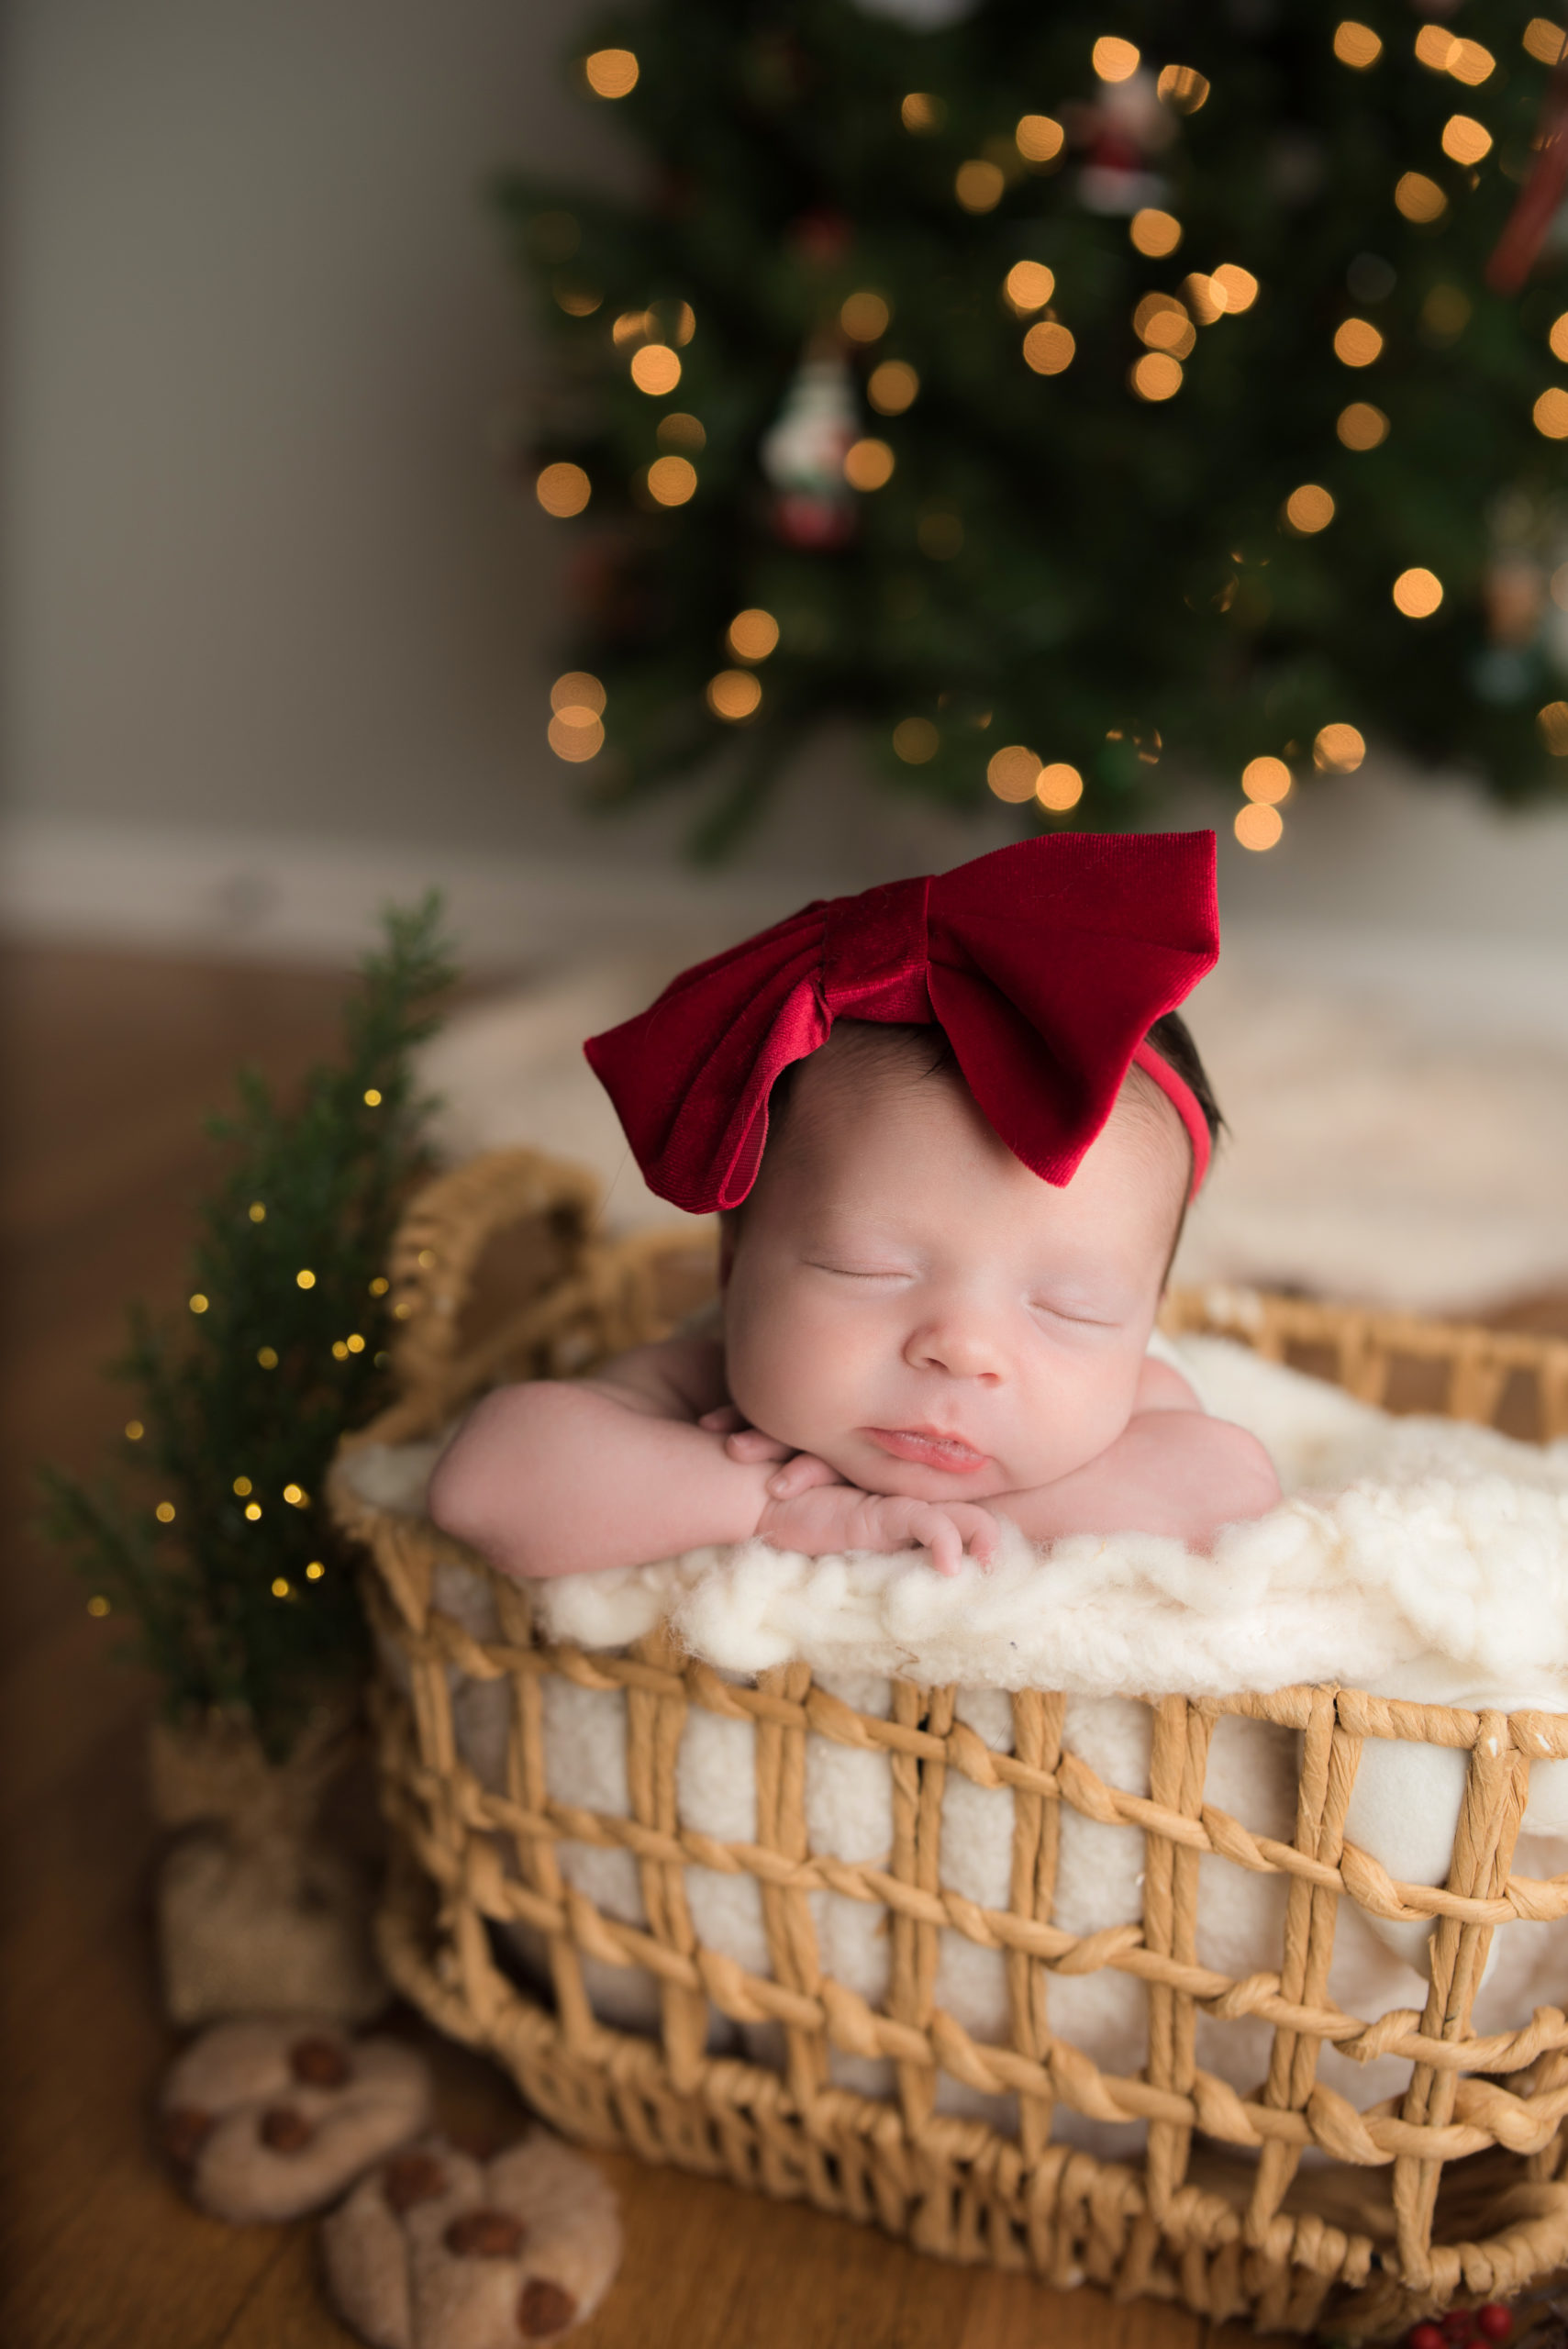 newborn baby girl wearing red bow posed in basket in front of christmas tree